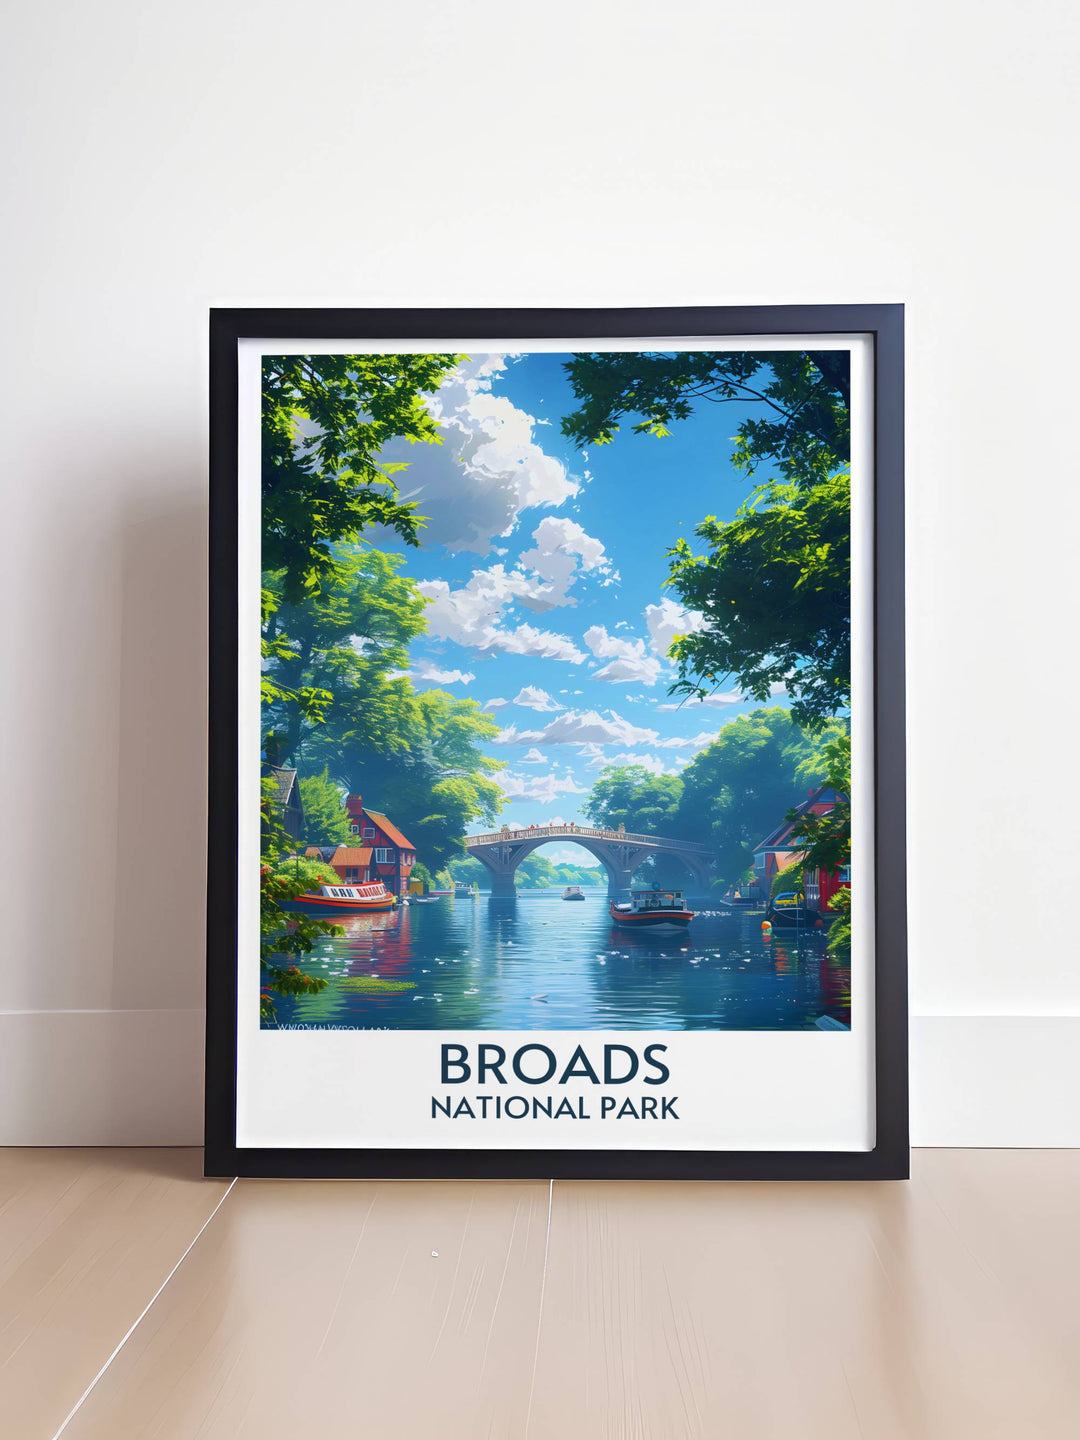 Enhance your living space with a Wroxham Bridge Digital Print. This art piece showcases the picturesque scenes of the Norfolk Broads, making it a great addition to your collection of UK National Park Art and Vintage Travel Posters.